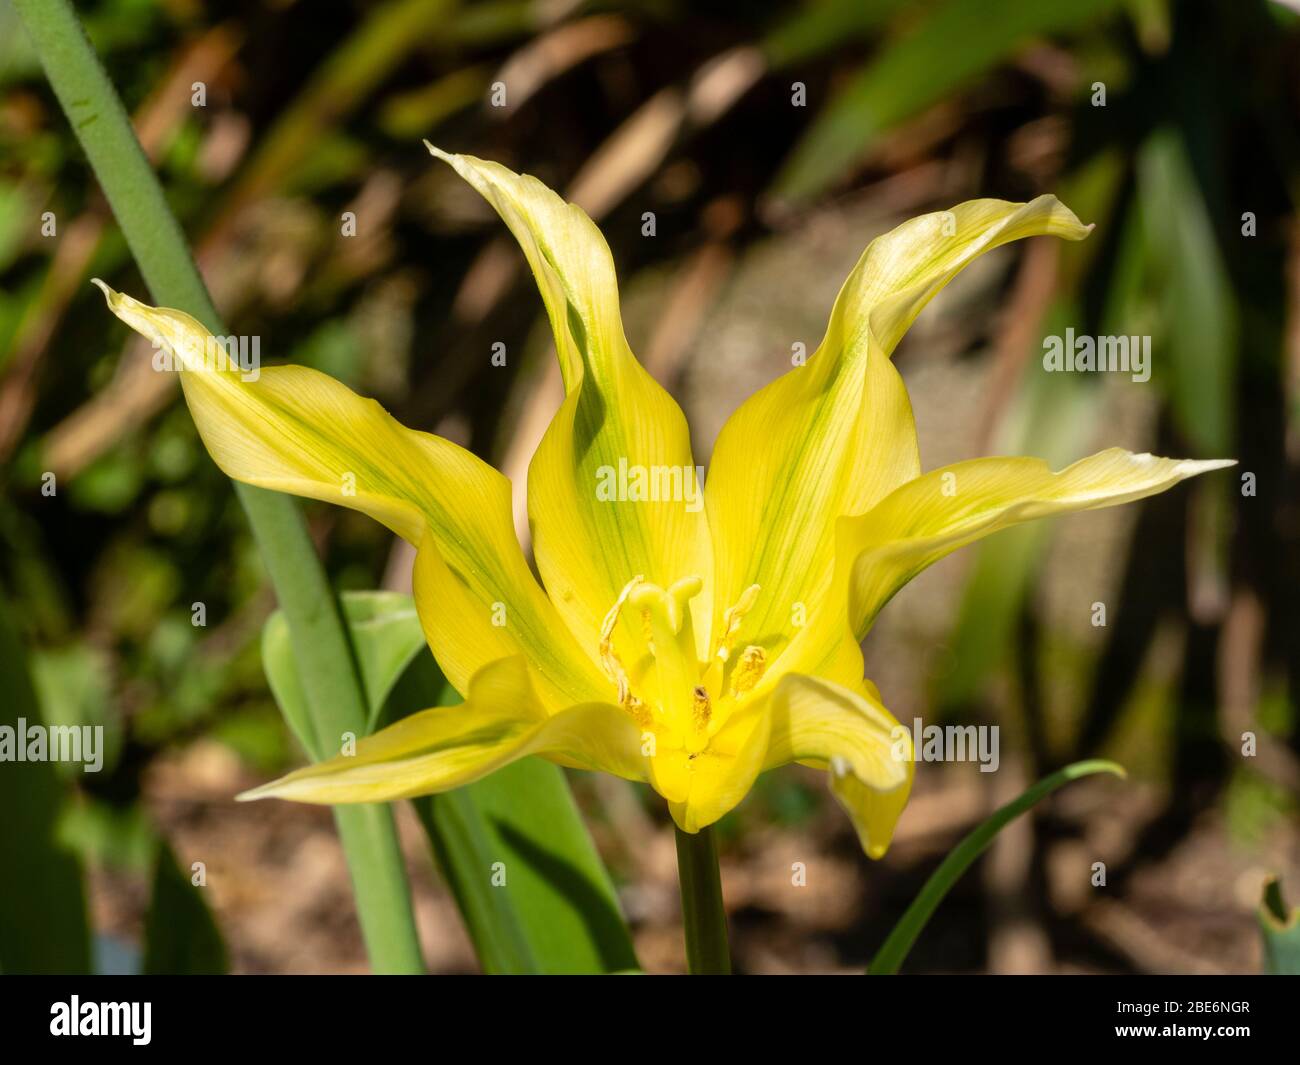 Green striped yellow bloom of the spring flowering hardy lily flowered viridiflora variety, Tulip 'Green Dance' Stock Photo